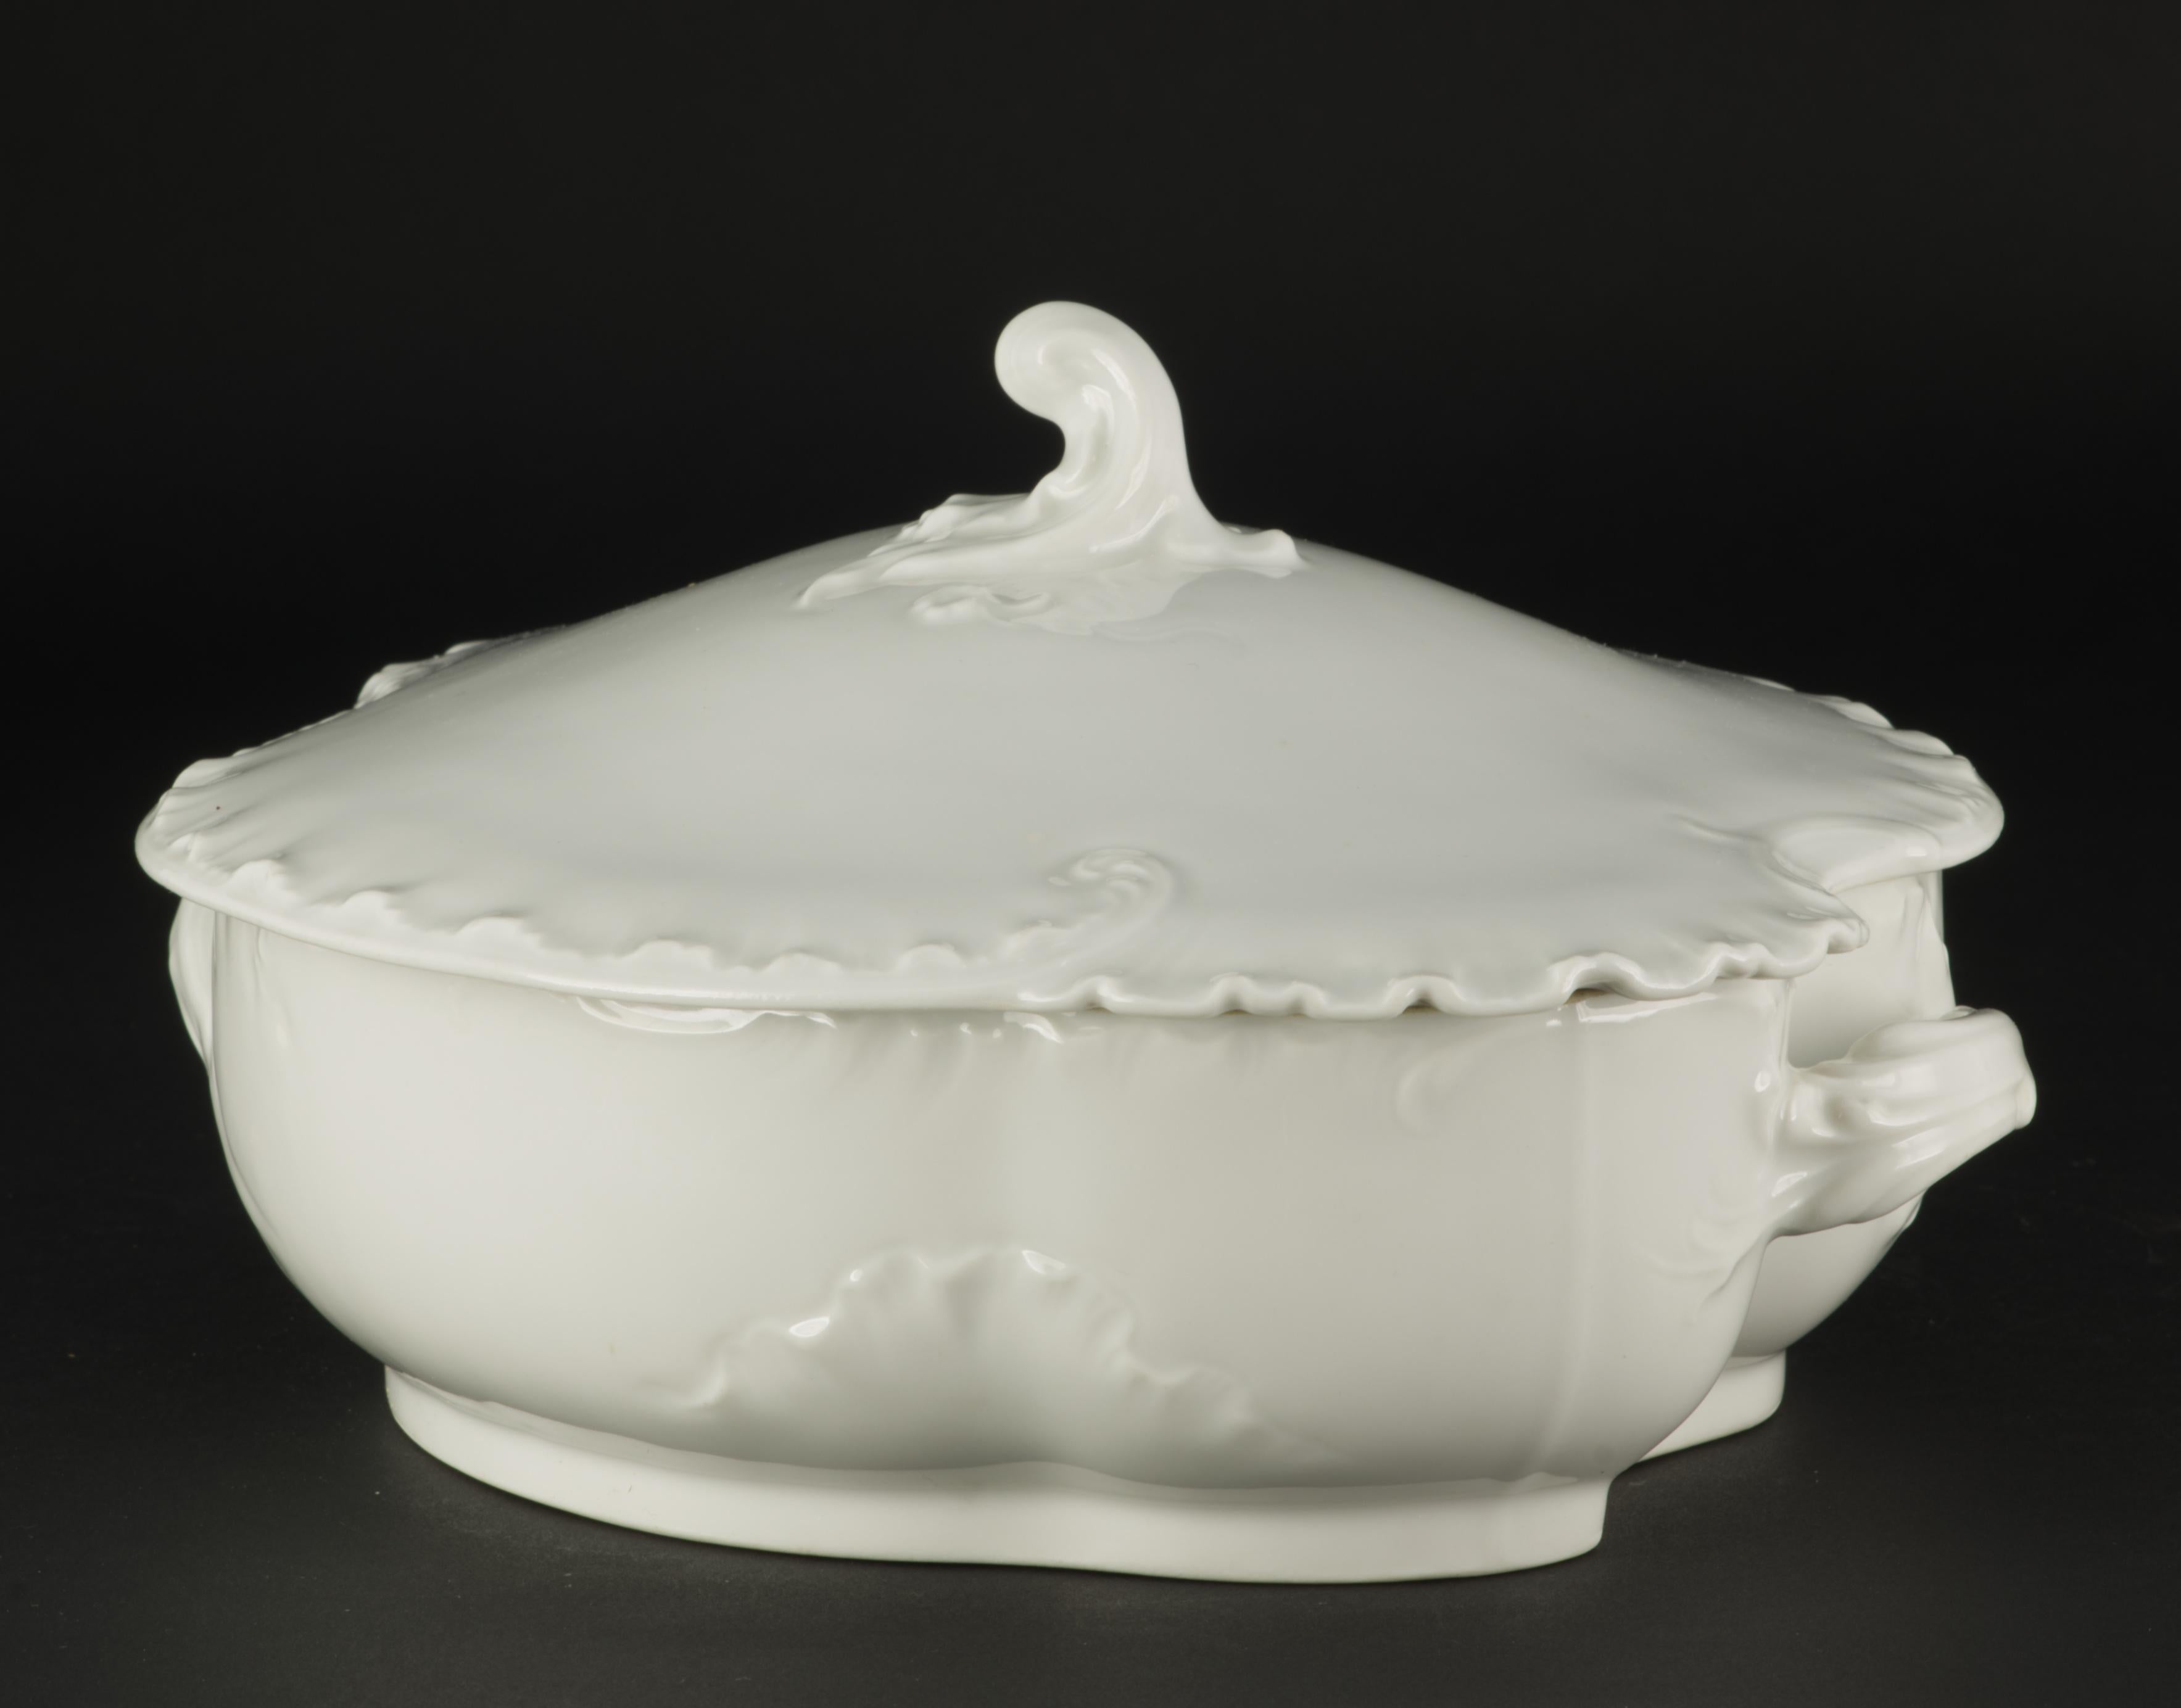 Haviland Limoges Oval Marseille Bowl with Cover, White Porcelain, 1894-1931 In Good Condition For Sale In Clifton Springs, NY